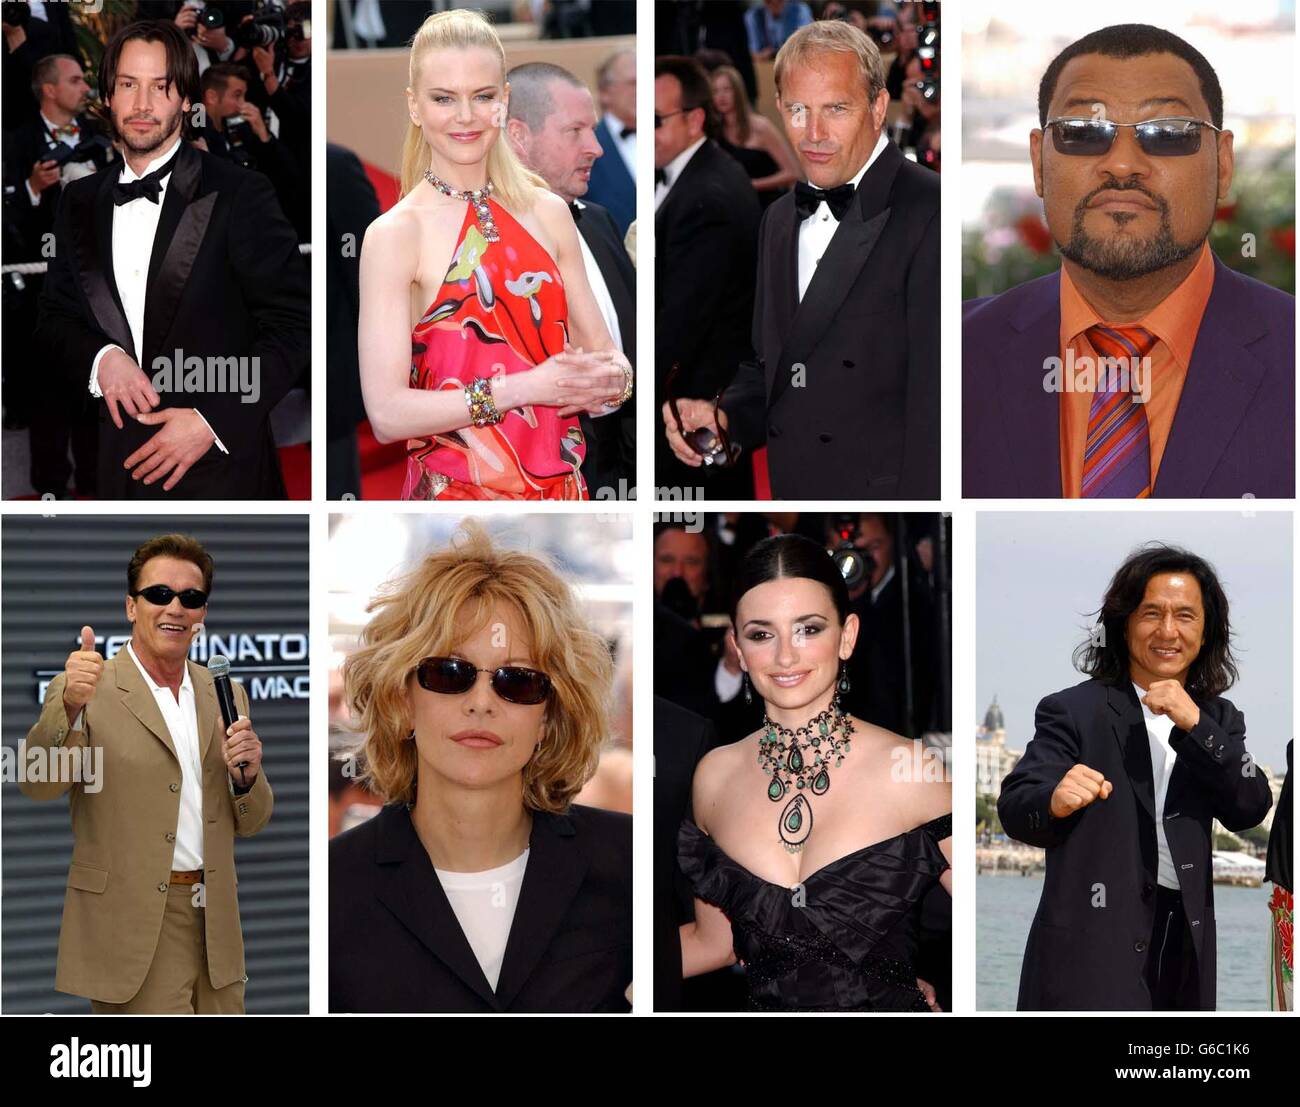 Hollywood stars (from left) Keanu Reeves, Nicole Kidman, Kevin Costner, Laurence Fishburne, Arnold Schwarzenegger, Meg Ryan, Penelope Cruz and Jackie Chan, all attending the 56th (2003) Cannes Film Festival in Cannes. * Organisers of the Cannes Film Festival, dismissed claims by tourism minister Kim Howells that Hollywood stars were too scared to fly. Mr Howells said American action heroes did not have the 'balls' to fly to Europe for fear of a terrorist attack. But there was little evidence of that in Cannes, with all the pictured stars jetting in to the French Riviera. Stock Photo